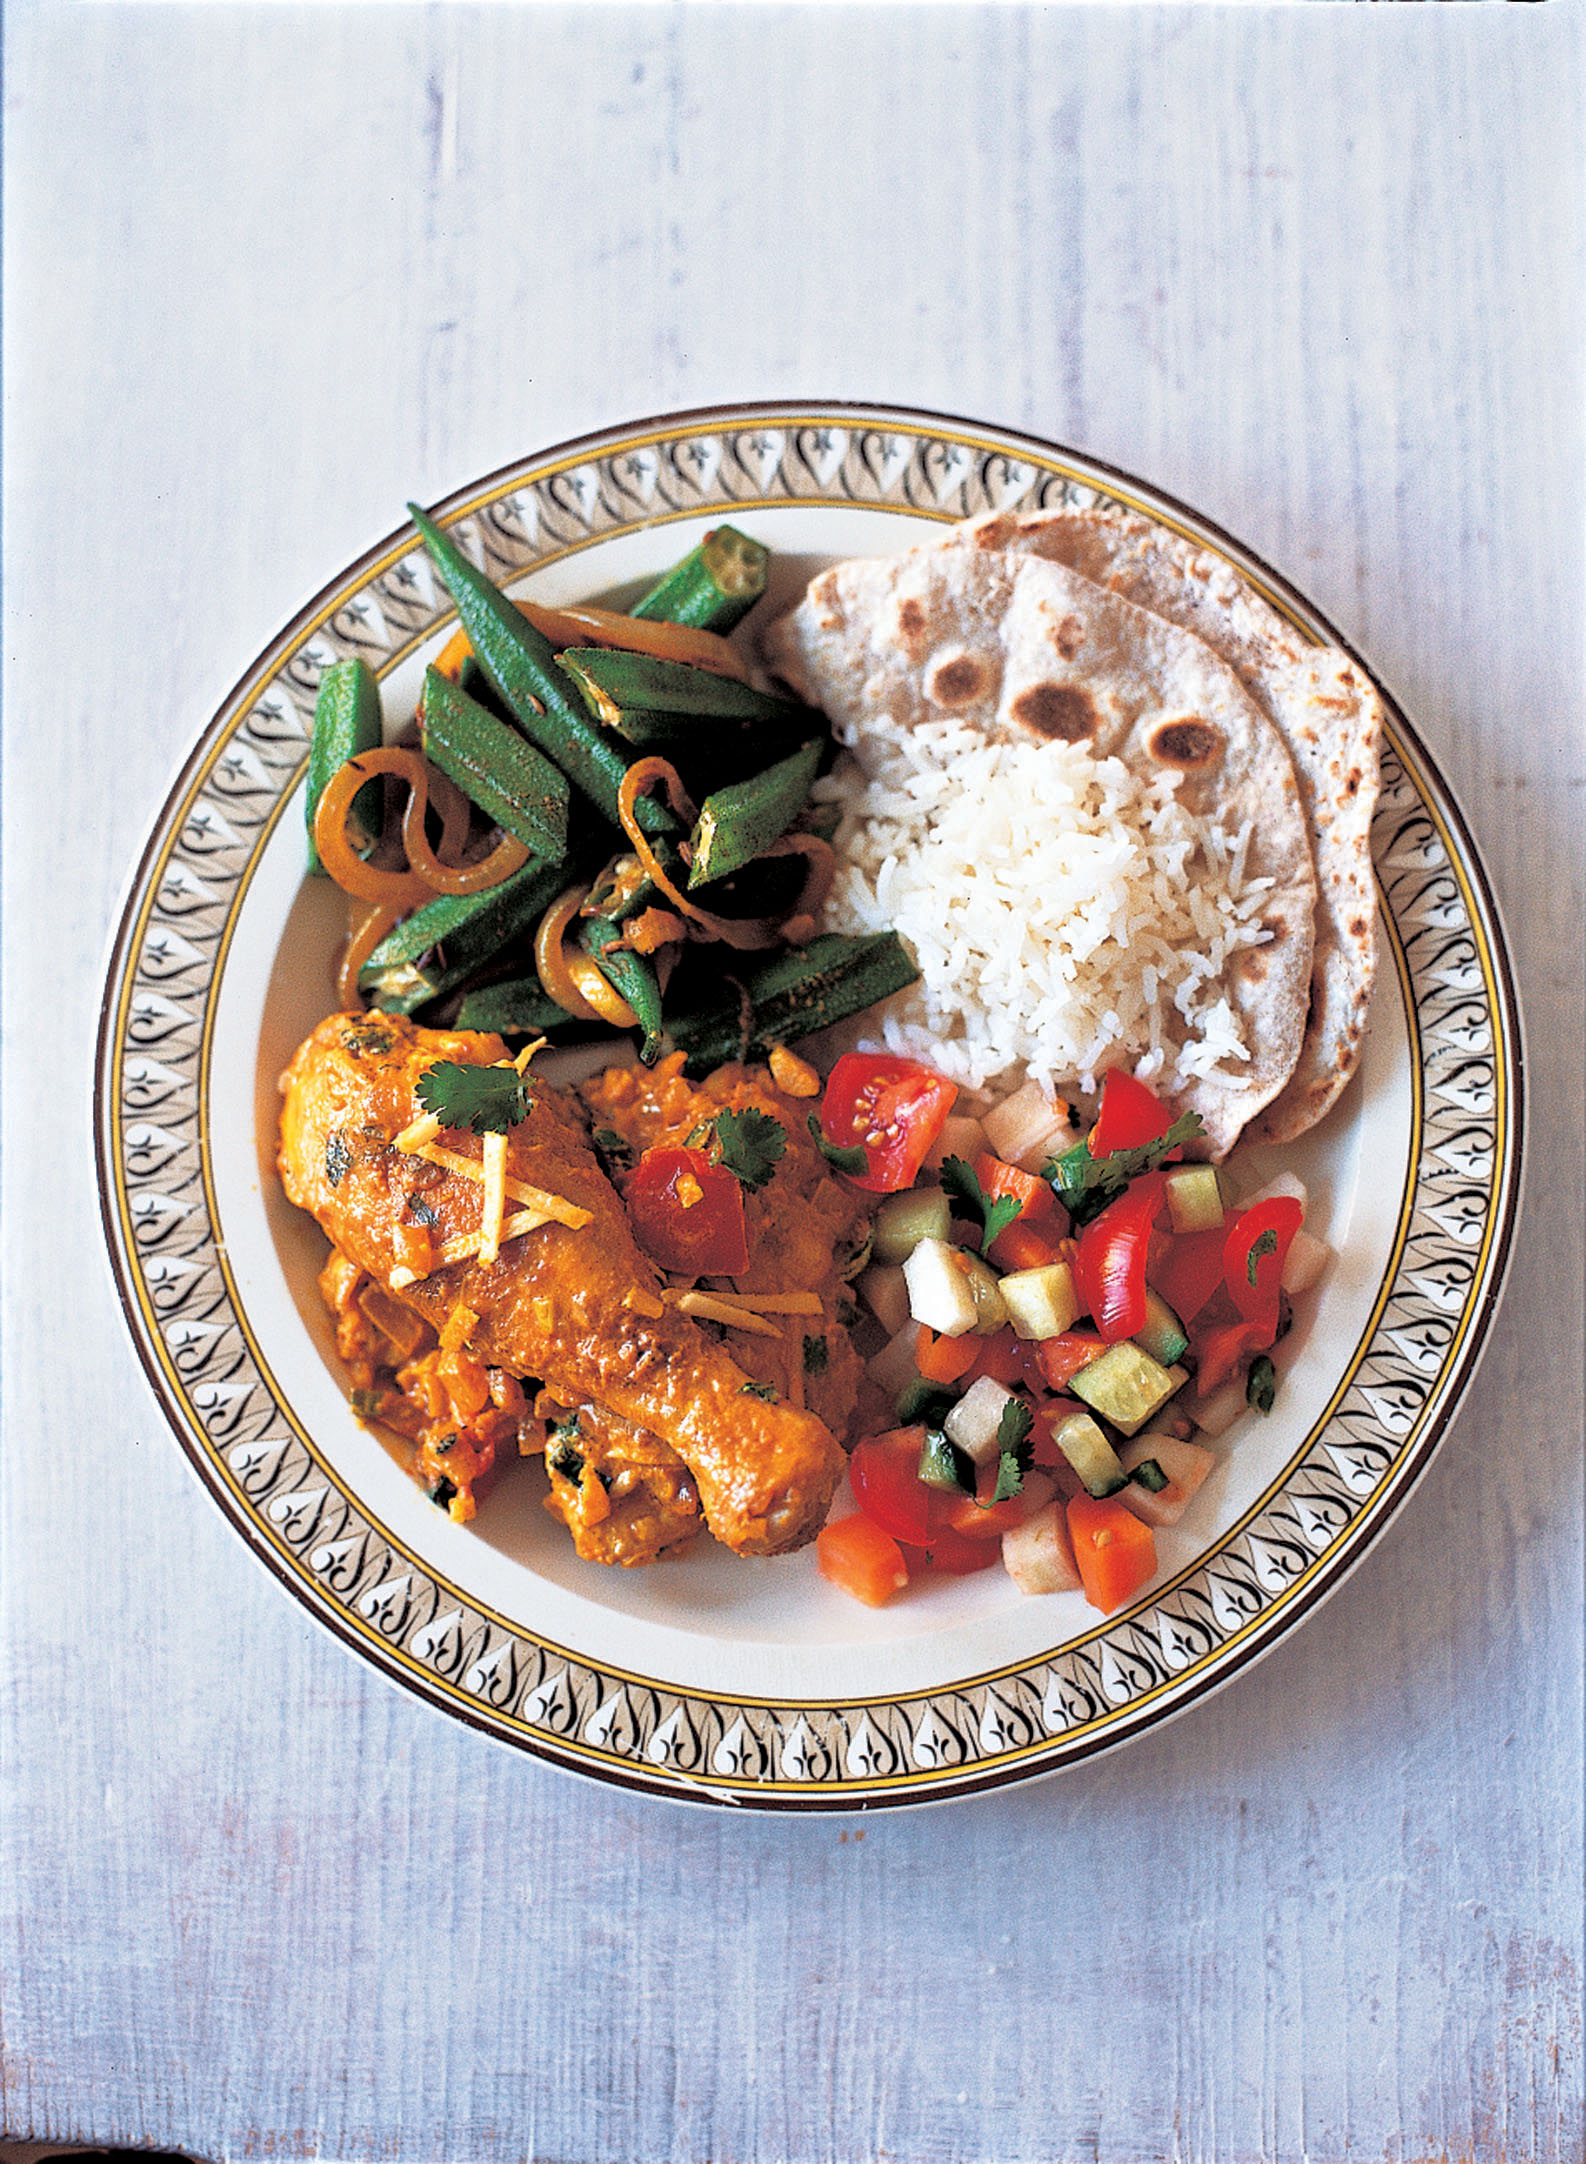 A quarter of the plate is filled with chicken curry, a quarter with vegetable curry, a quarter rice and chapati, and a salad in the last quarter. Photo: Courtesy of Azmina Govindji